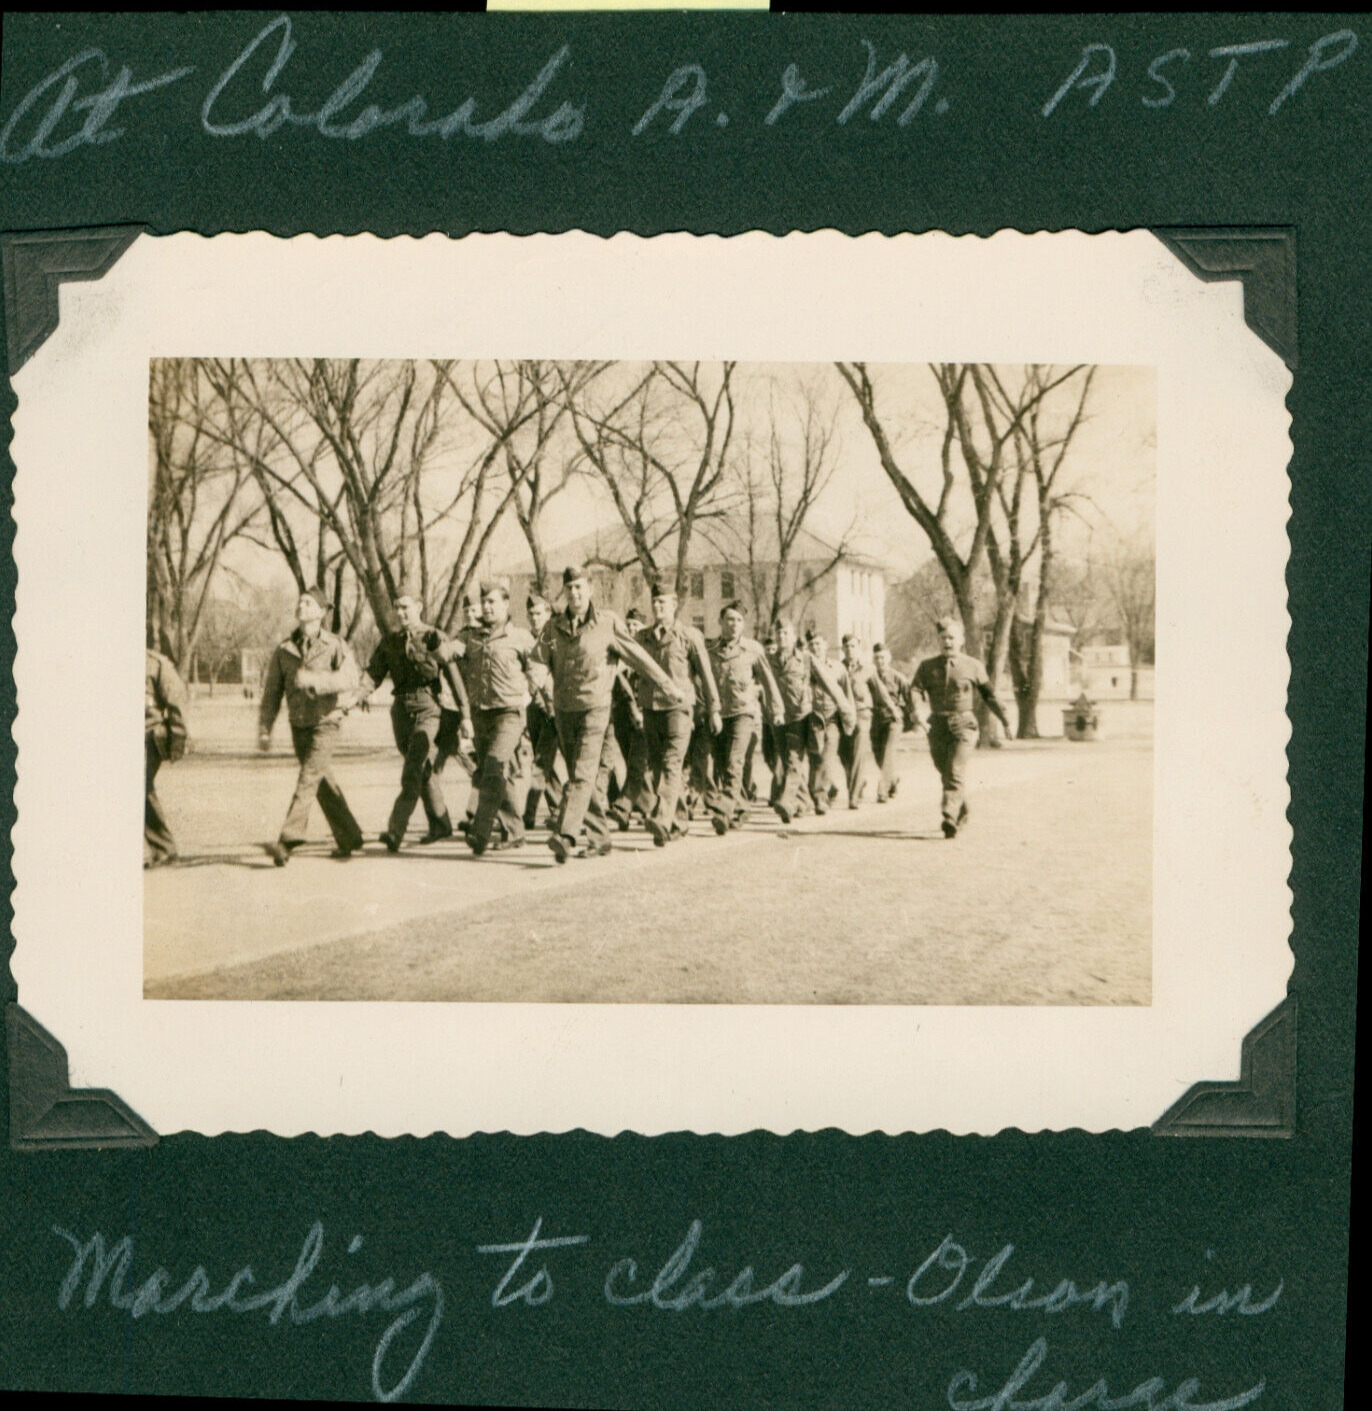 1943 US Army 469th Ord Evac Co soldier at CO A&M Photo #1 marching to clases